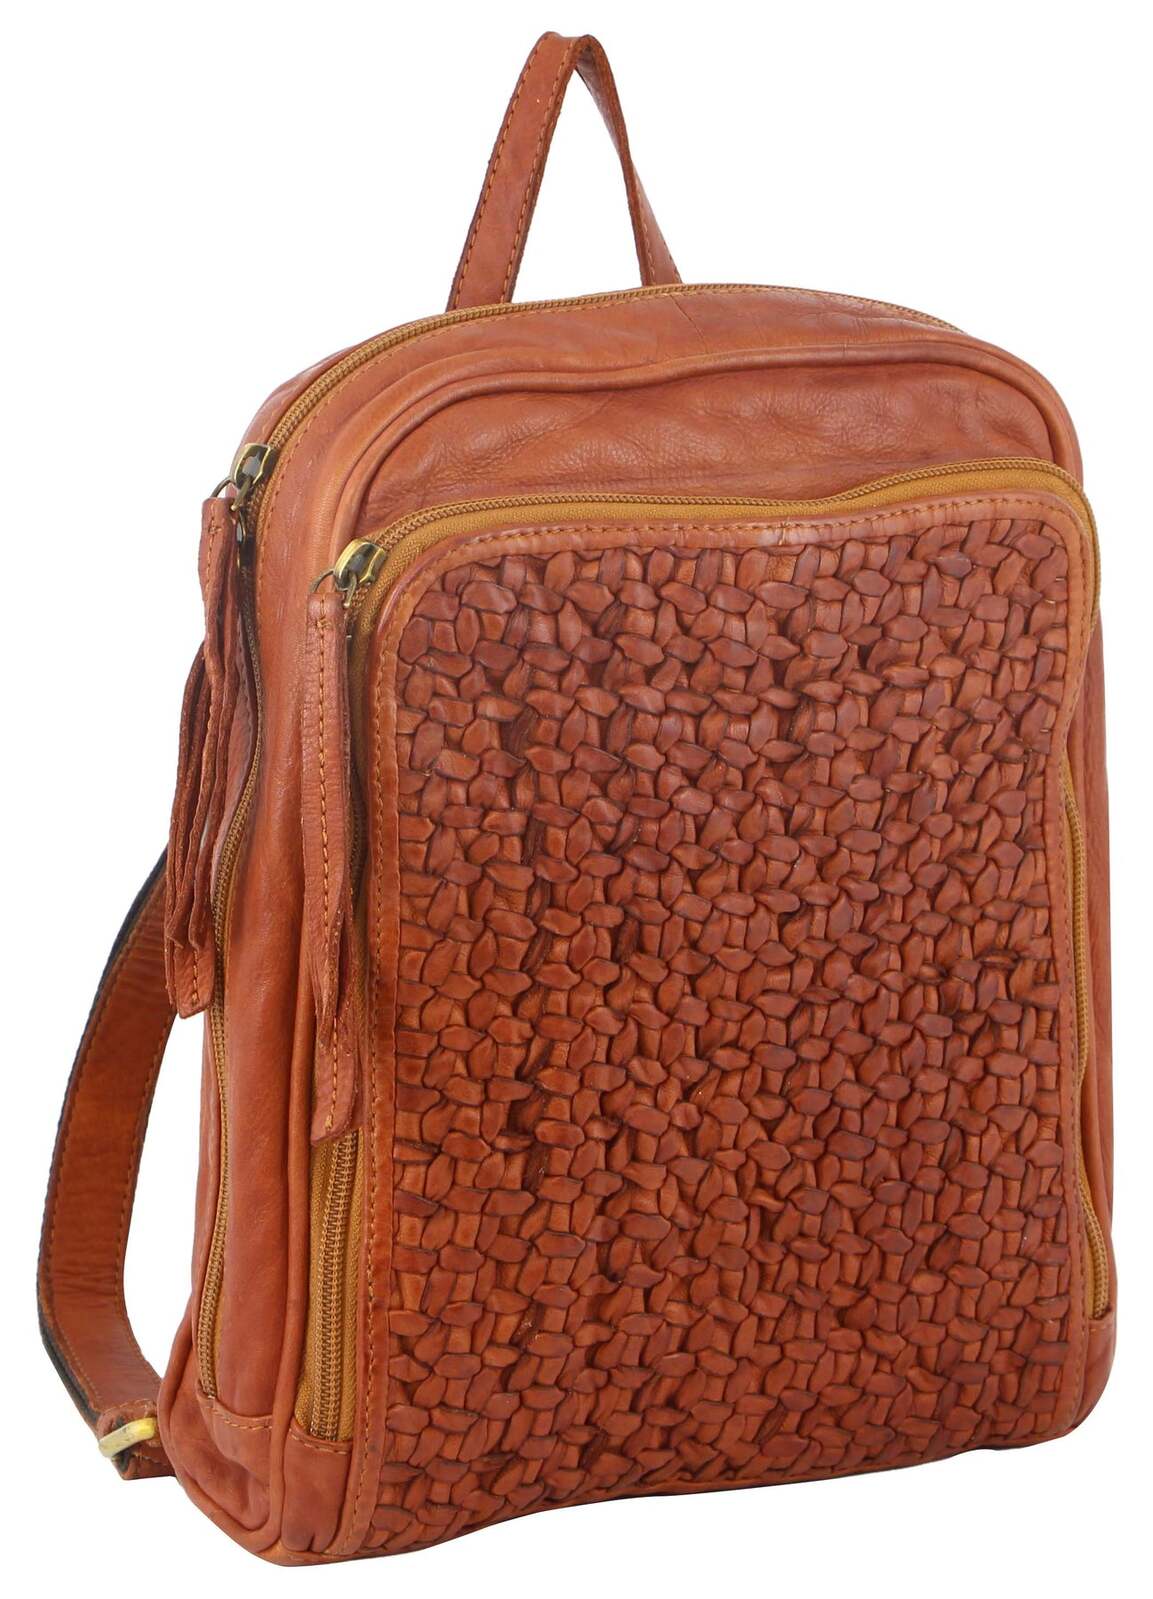 Woven Leather Ladies Backpack Bag Travel - Cognac